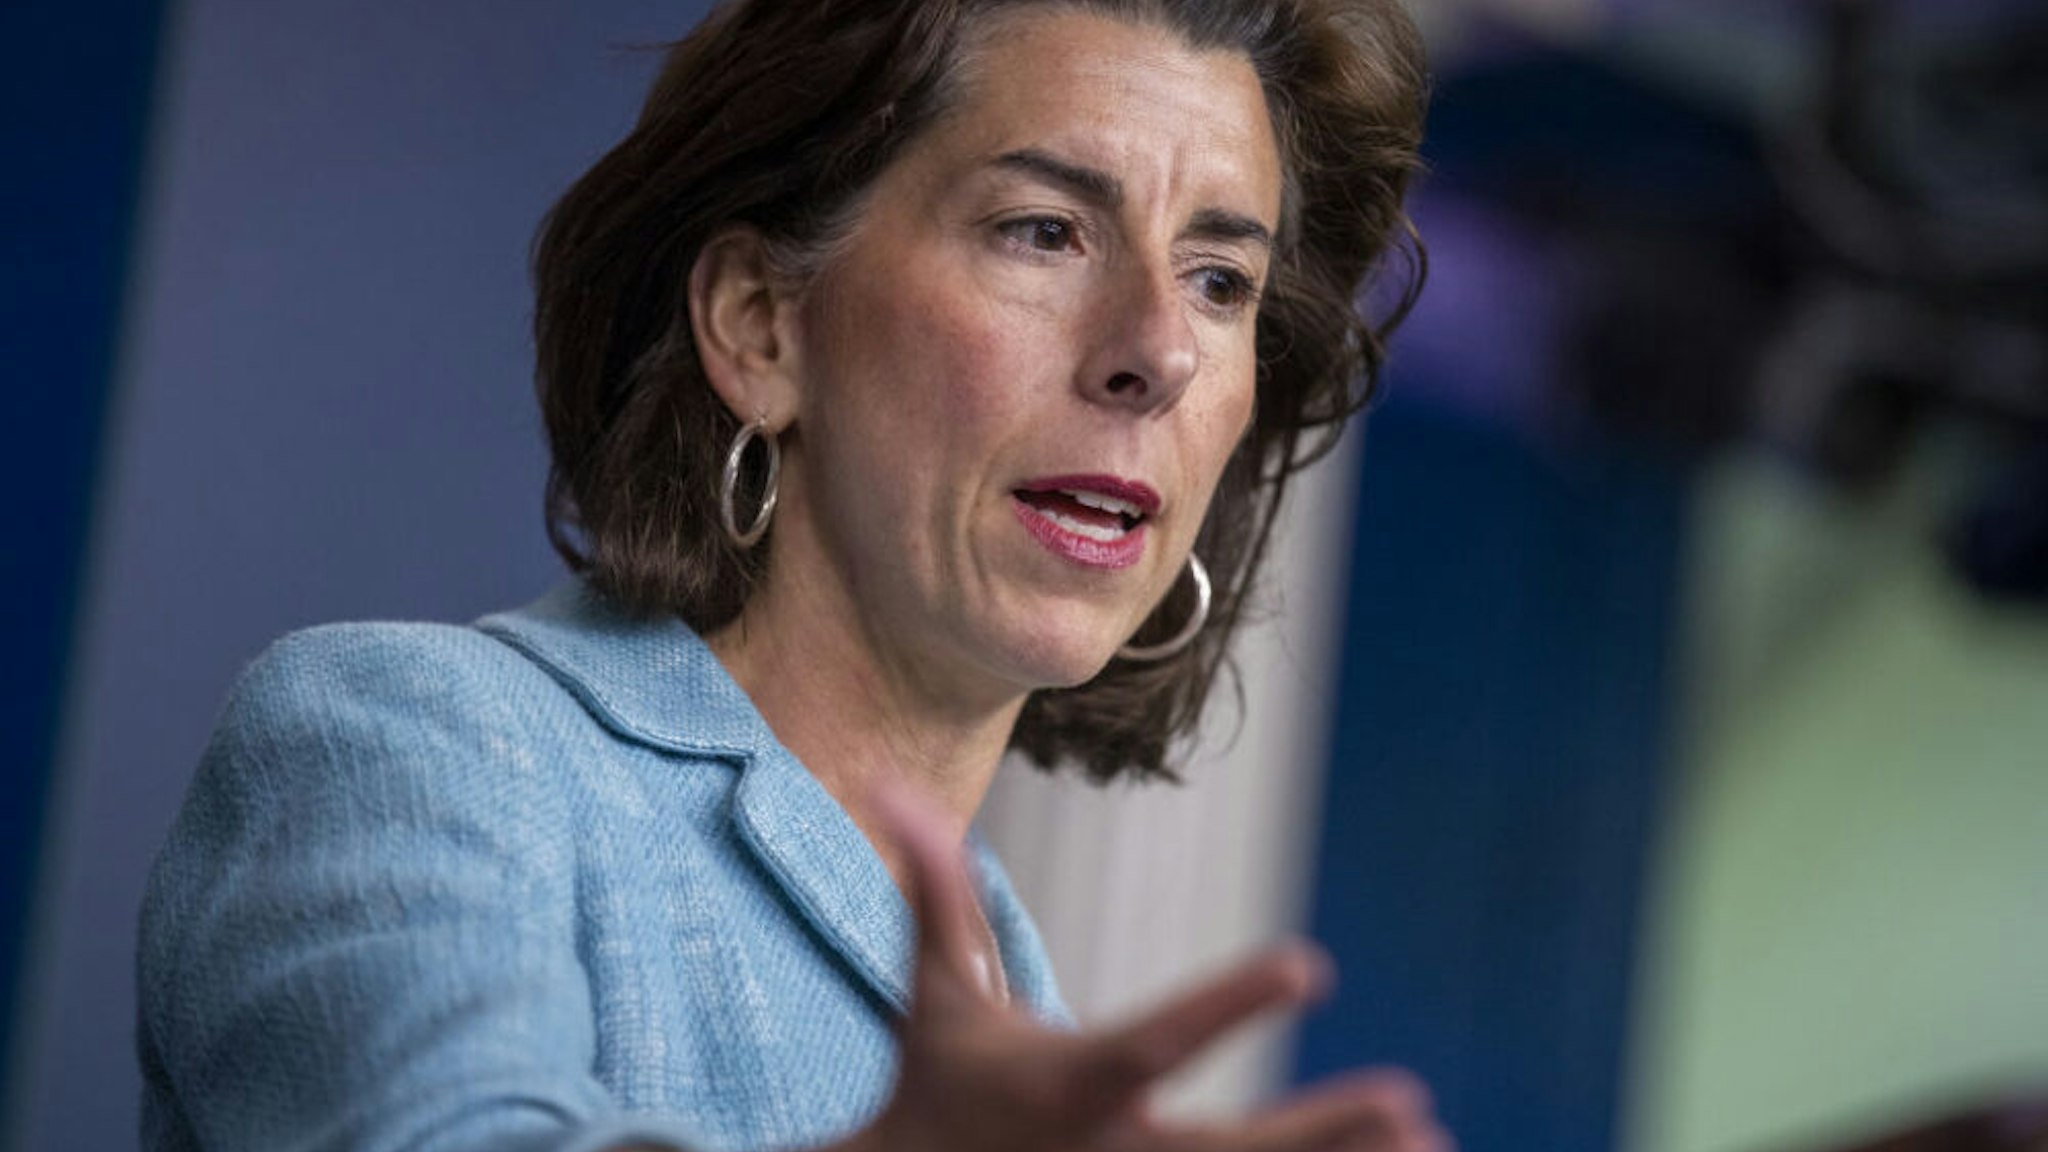 Gina Raimondo, U.S. commerce secretary, speaks during a news conference in the James S. Brady Press Briefing Room at the White House in Washington, D.C., U.S., on Thursday, July 22, 2021. President Joe Biden will host business and labor leaders at the White House on Thursday as a bipartisan group of senators nears an agreement that will allow the chamber to begin debating infrastructure legislation.